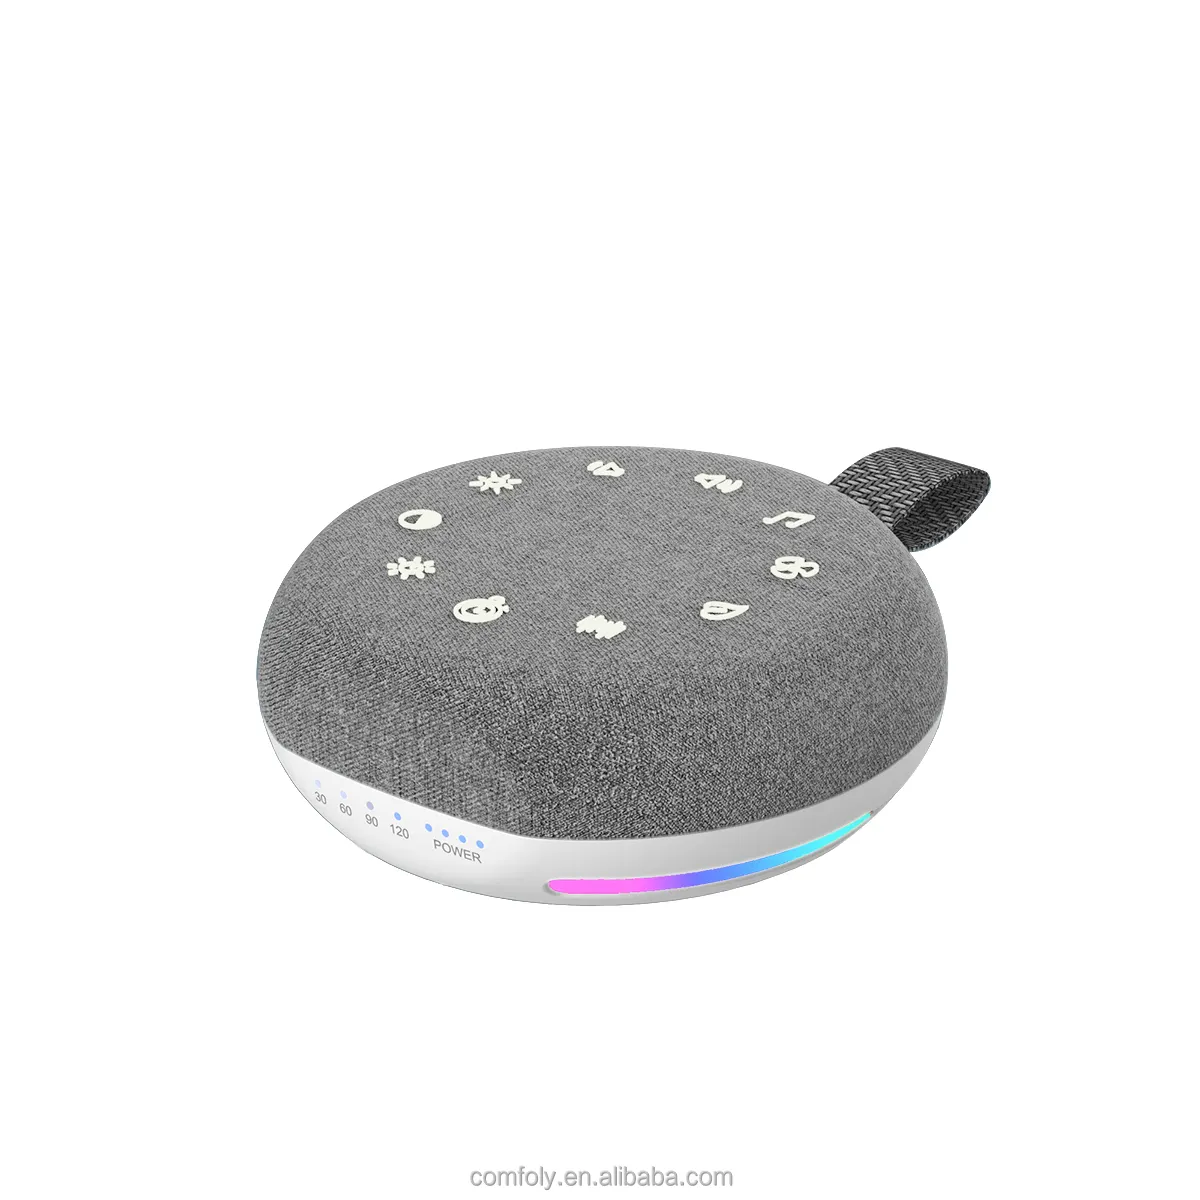 noise machine 7 color night lights portable sleep Therapy Baby White Noise Sound Generator white noise machine